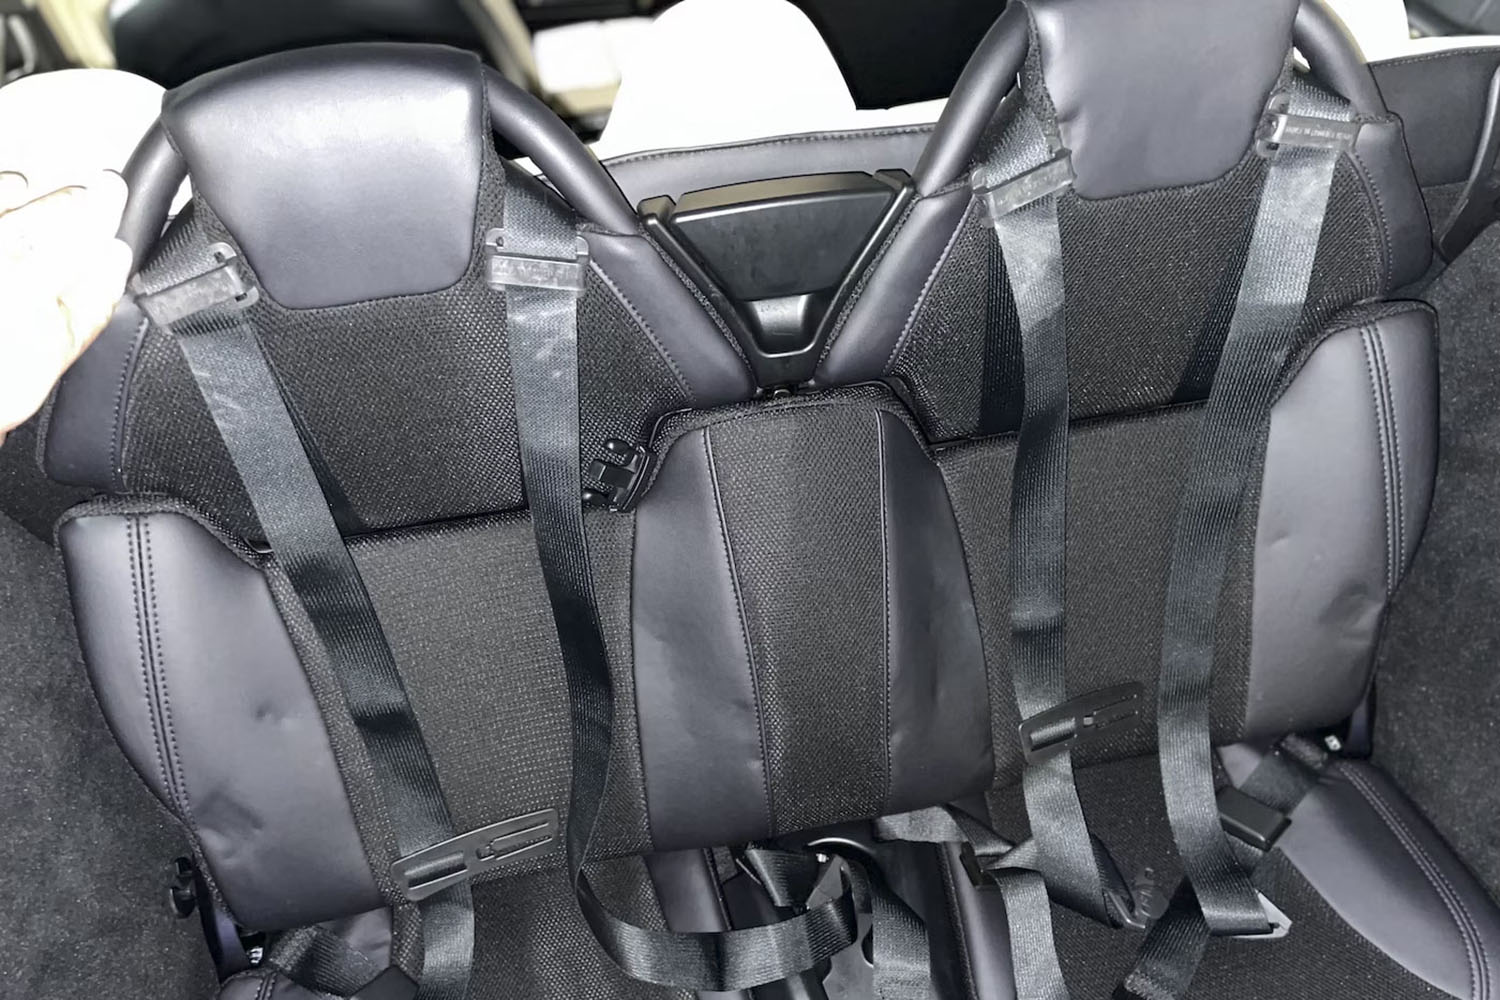 Rear-facing jump seats in 2013 Tesla Model S owned by Jack White